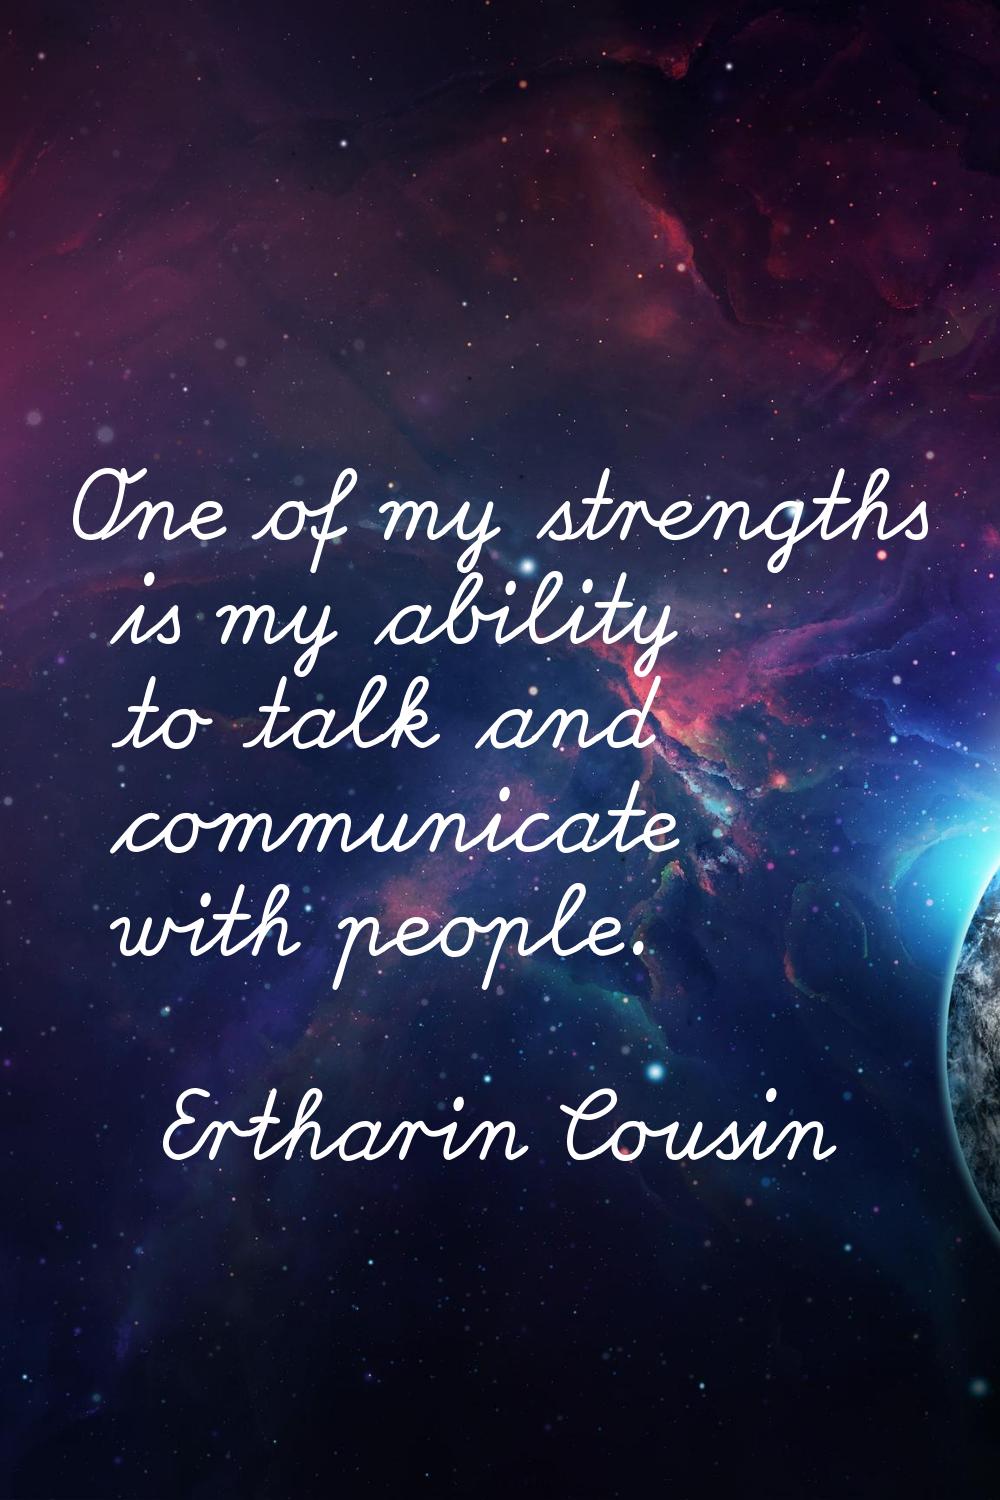 One of my strengths is my ability to talk and communicate with people.